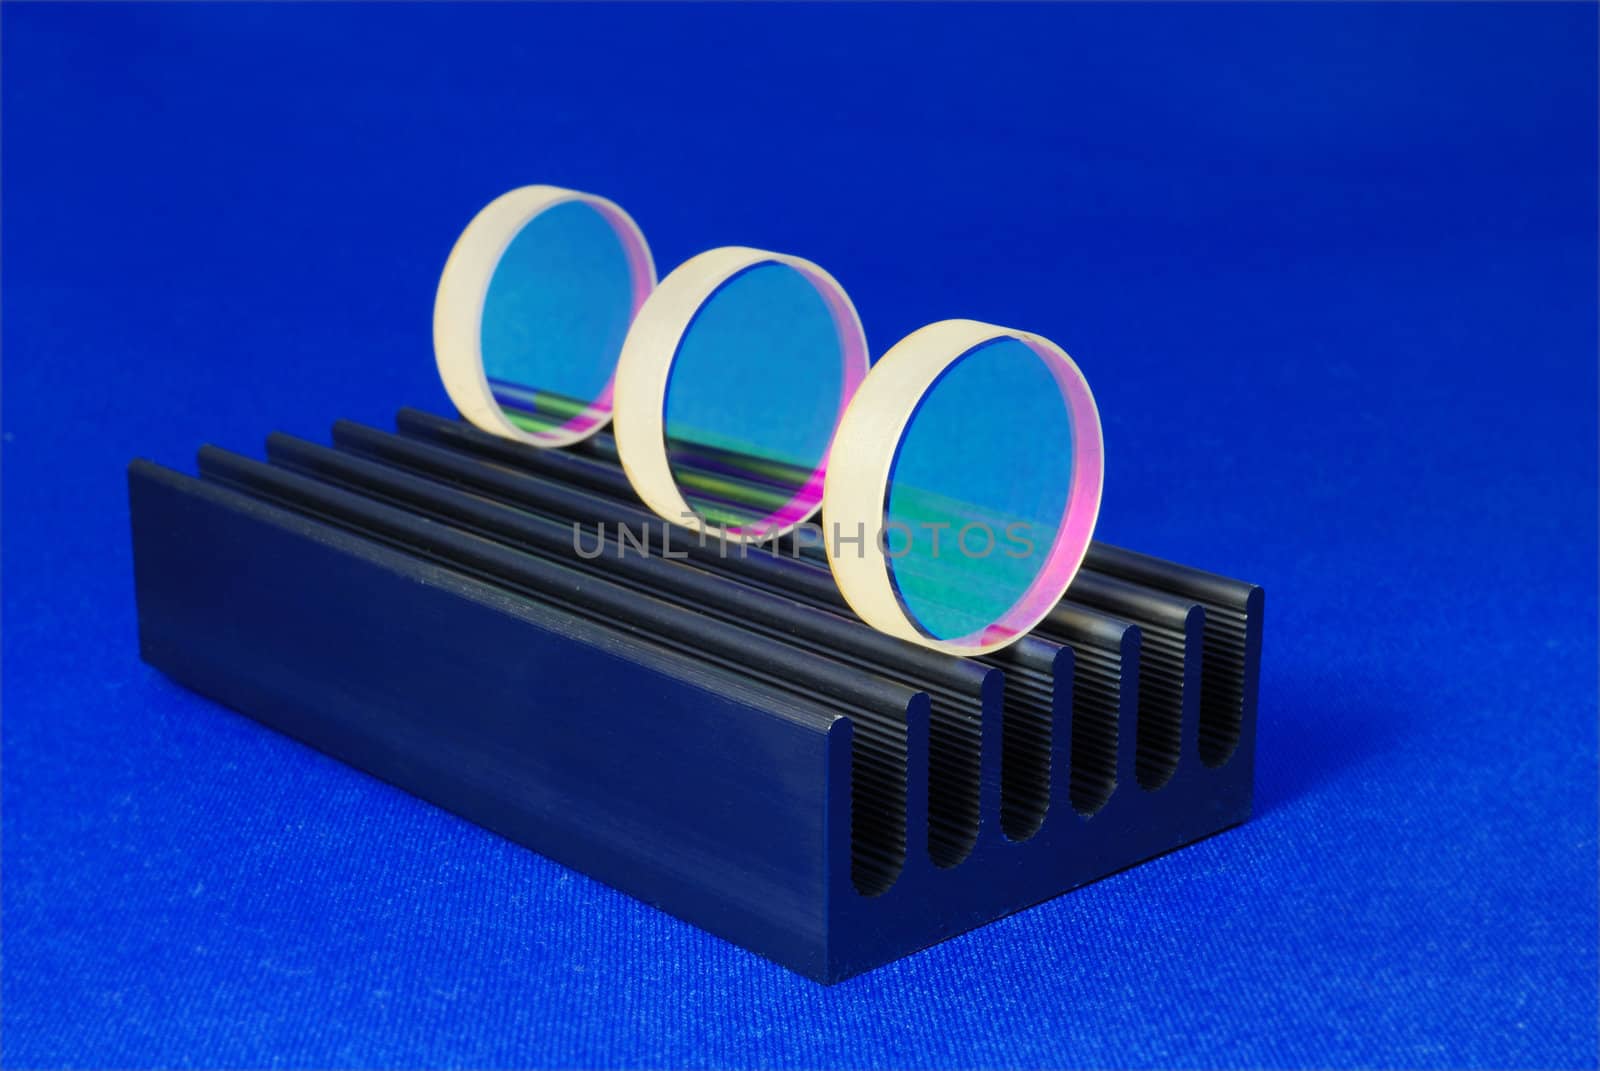  specially coated optical mirrors for laser industry and science on the black metallic rail; selective focus on front mirror